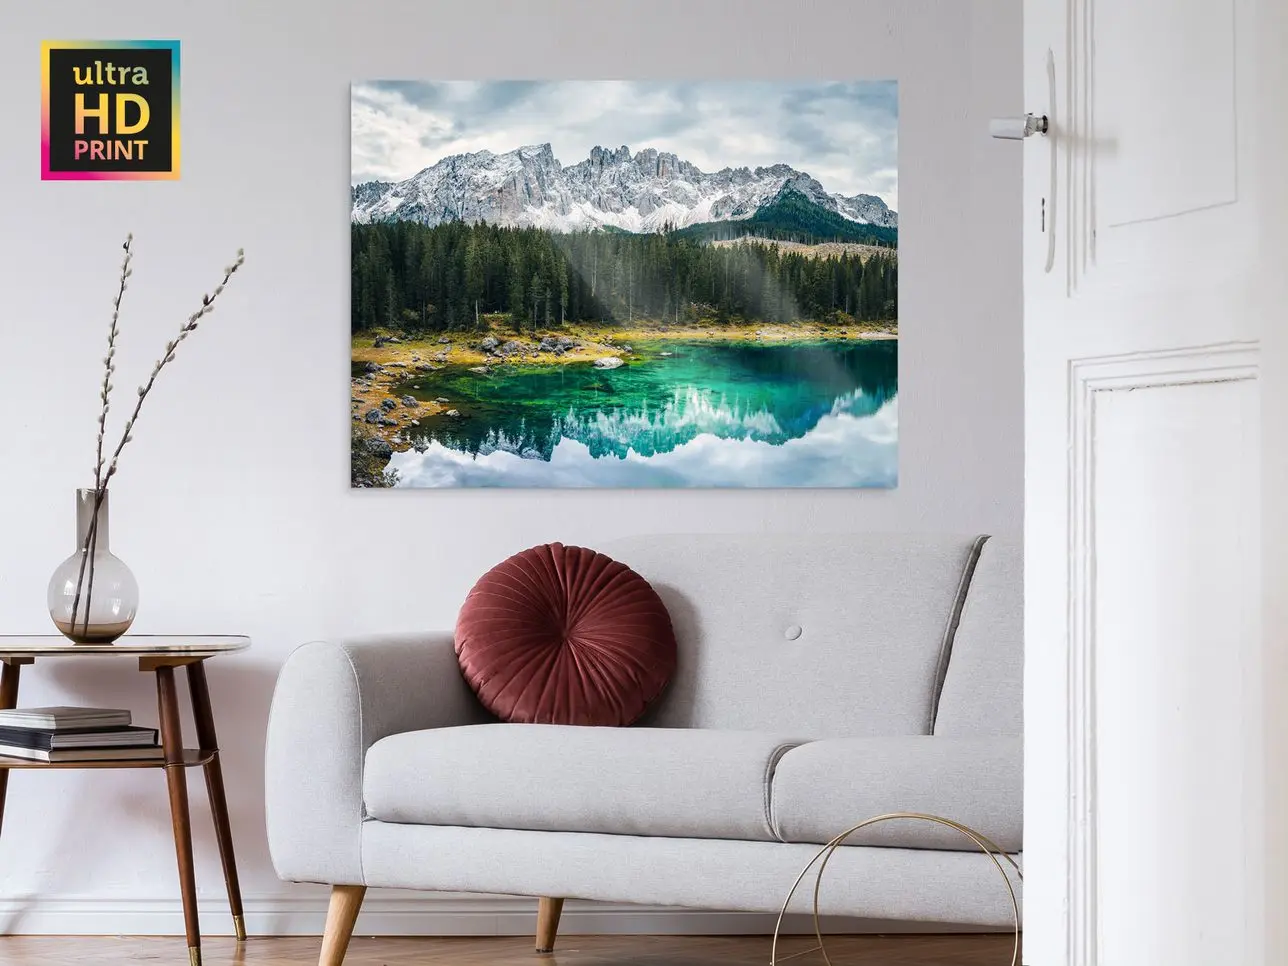 A mountain and a forest reflected in a lake on a ultraHD Photo Print On Aluminum Backing hangs on a wall in a living room.